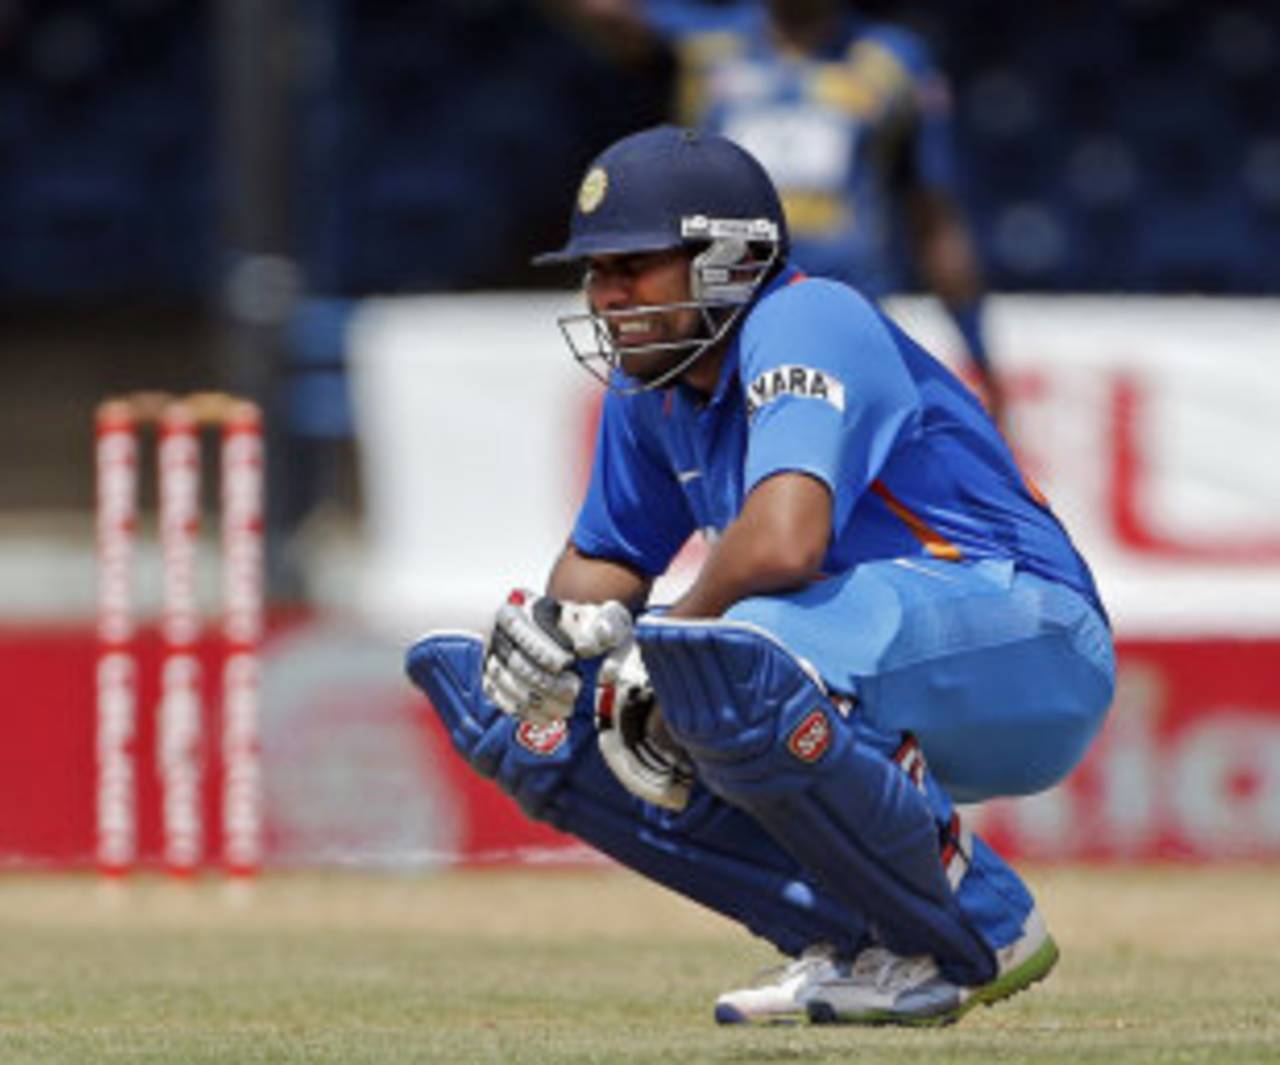 Rohit Sharma grimaces after getting hit on the body during the game against Sri Lanka&nbsp;&nbsp;&bull;&nbsp;&nbsp;Associated Press